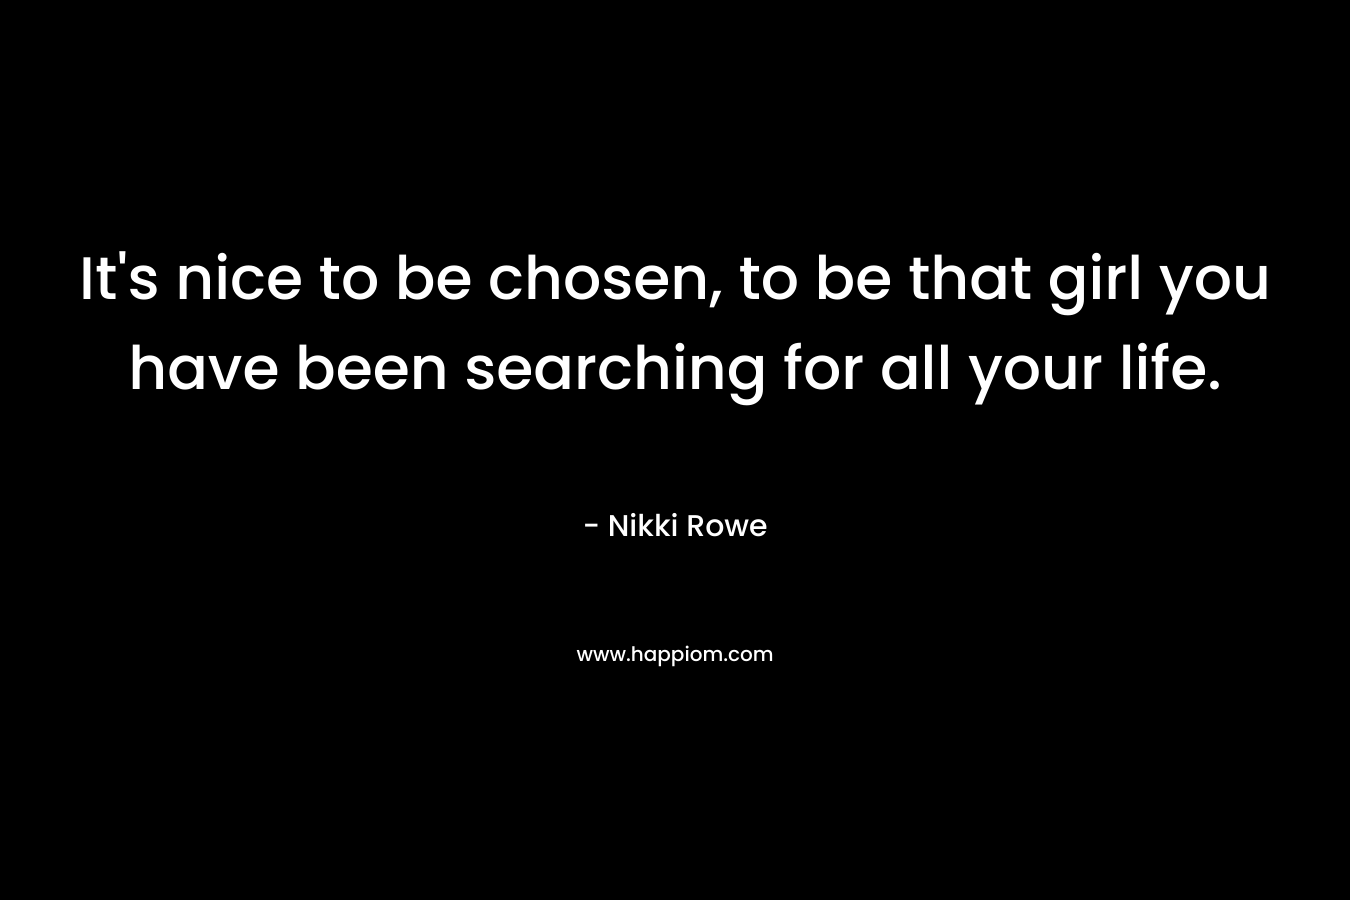 It’s nice to be chosen, to be that girl you have been searching for all your life. – Nikki Rowe